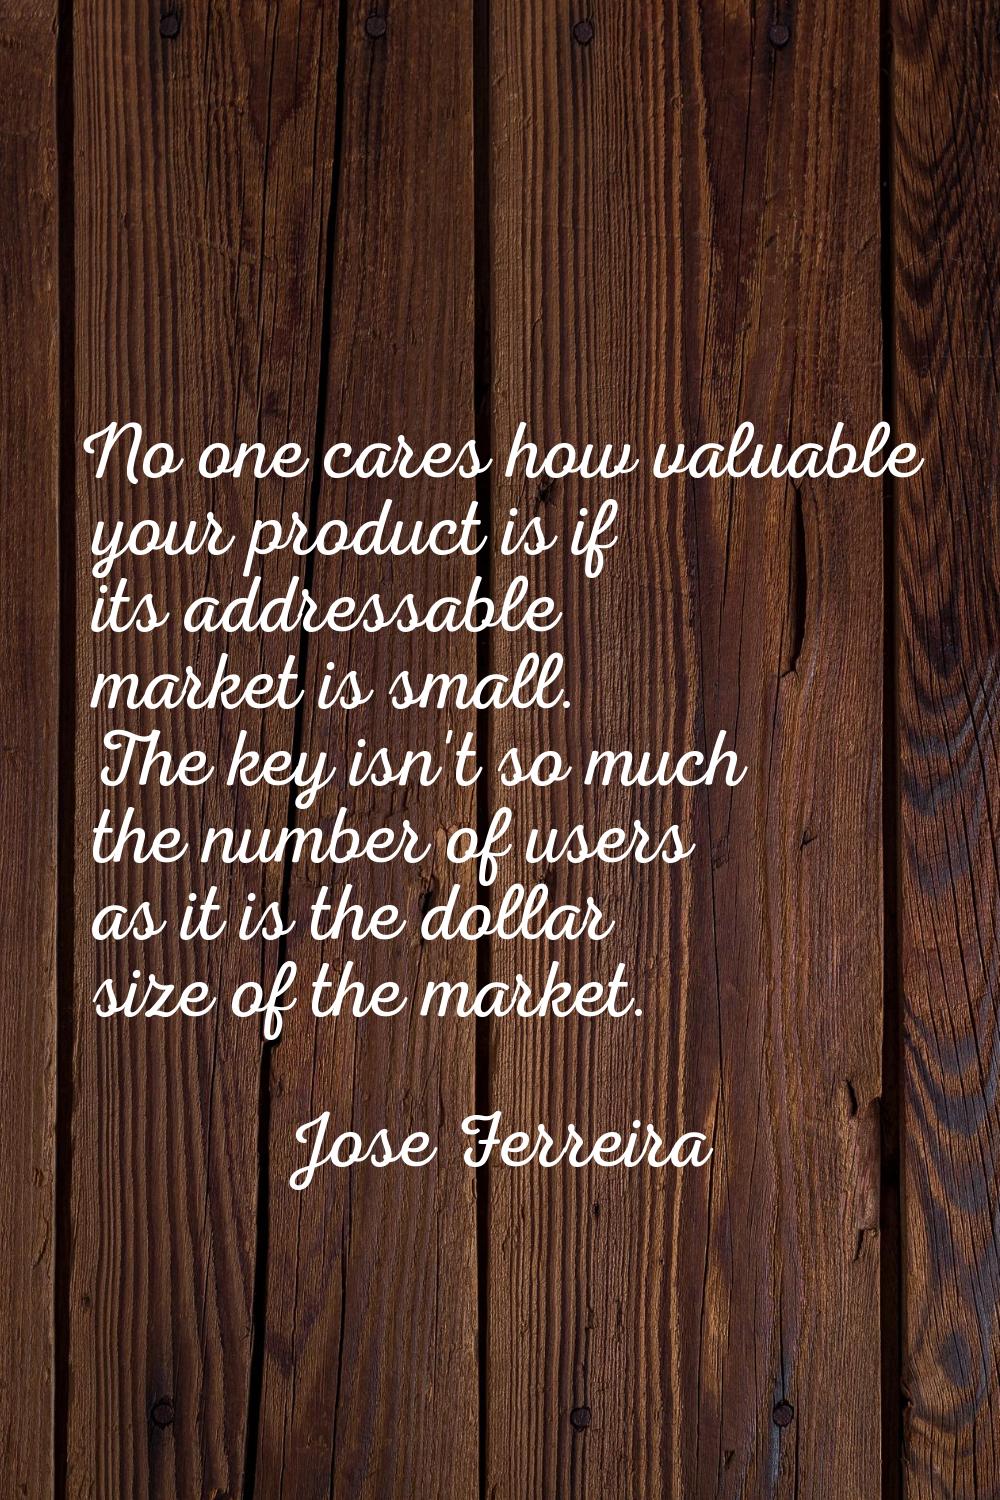 No one cares how valuable your product is if its addressable market is small. The key isn't so much